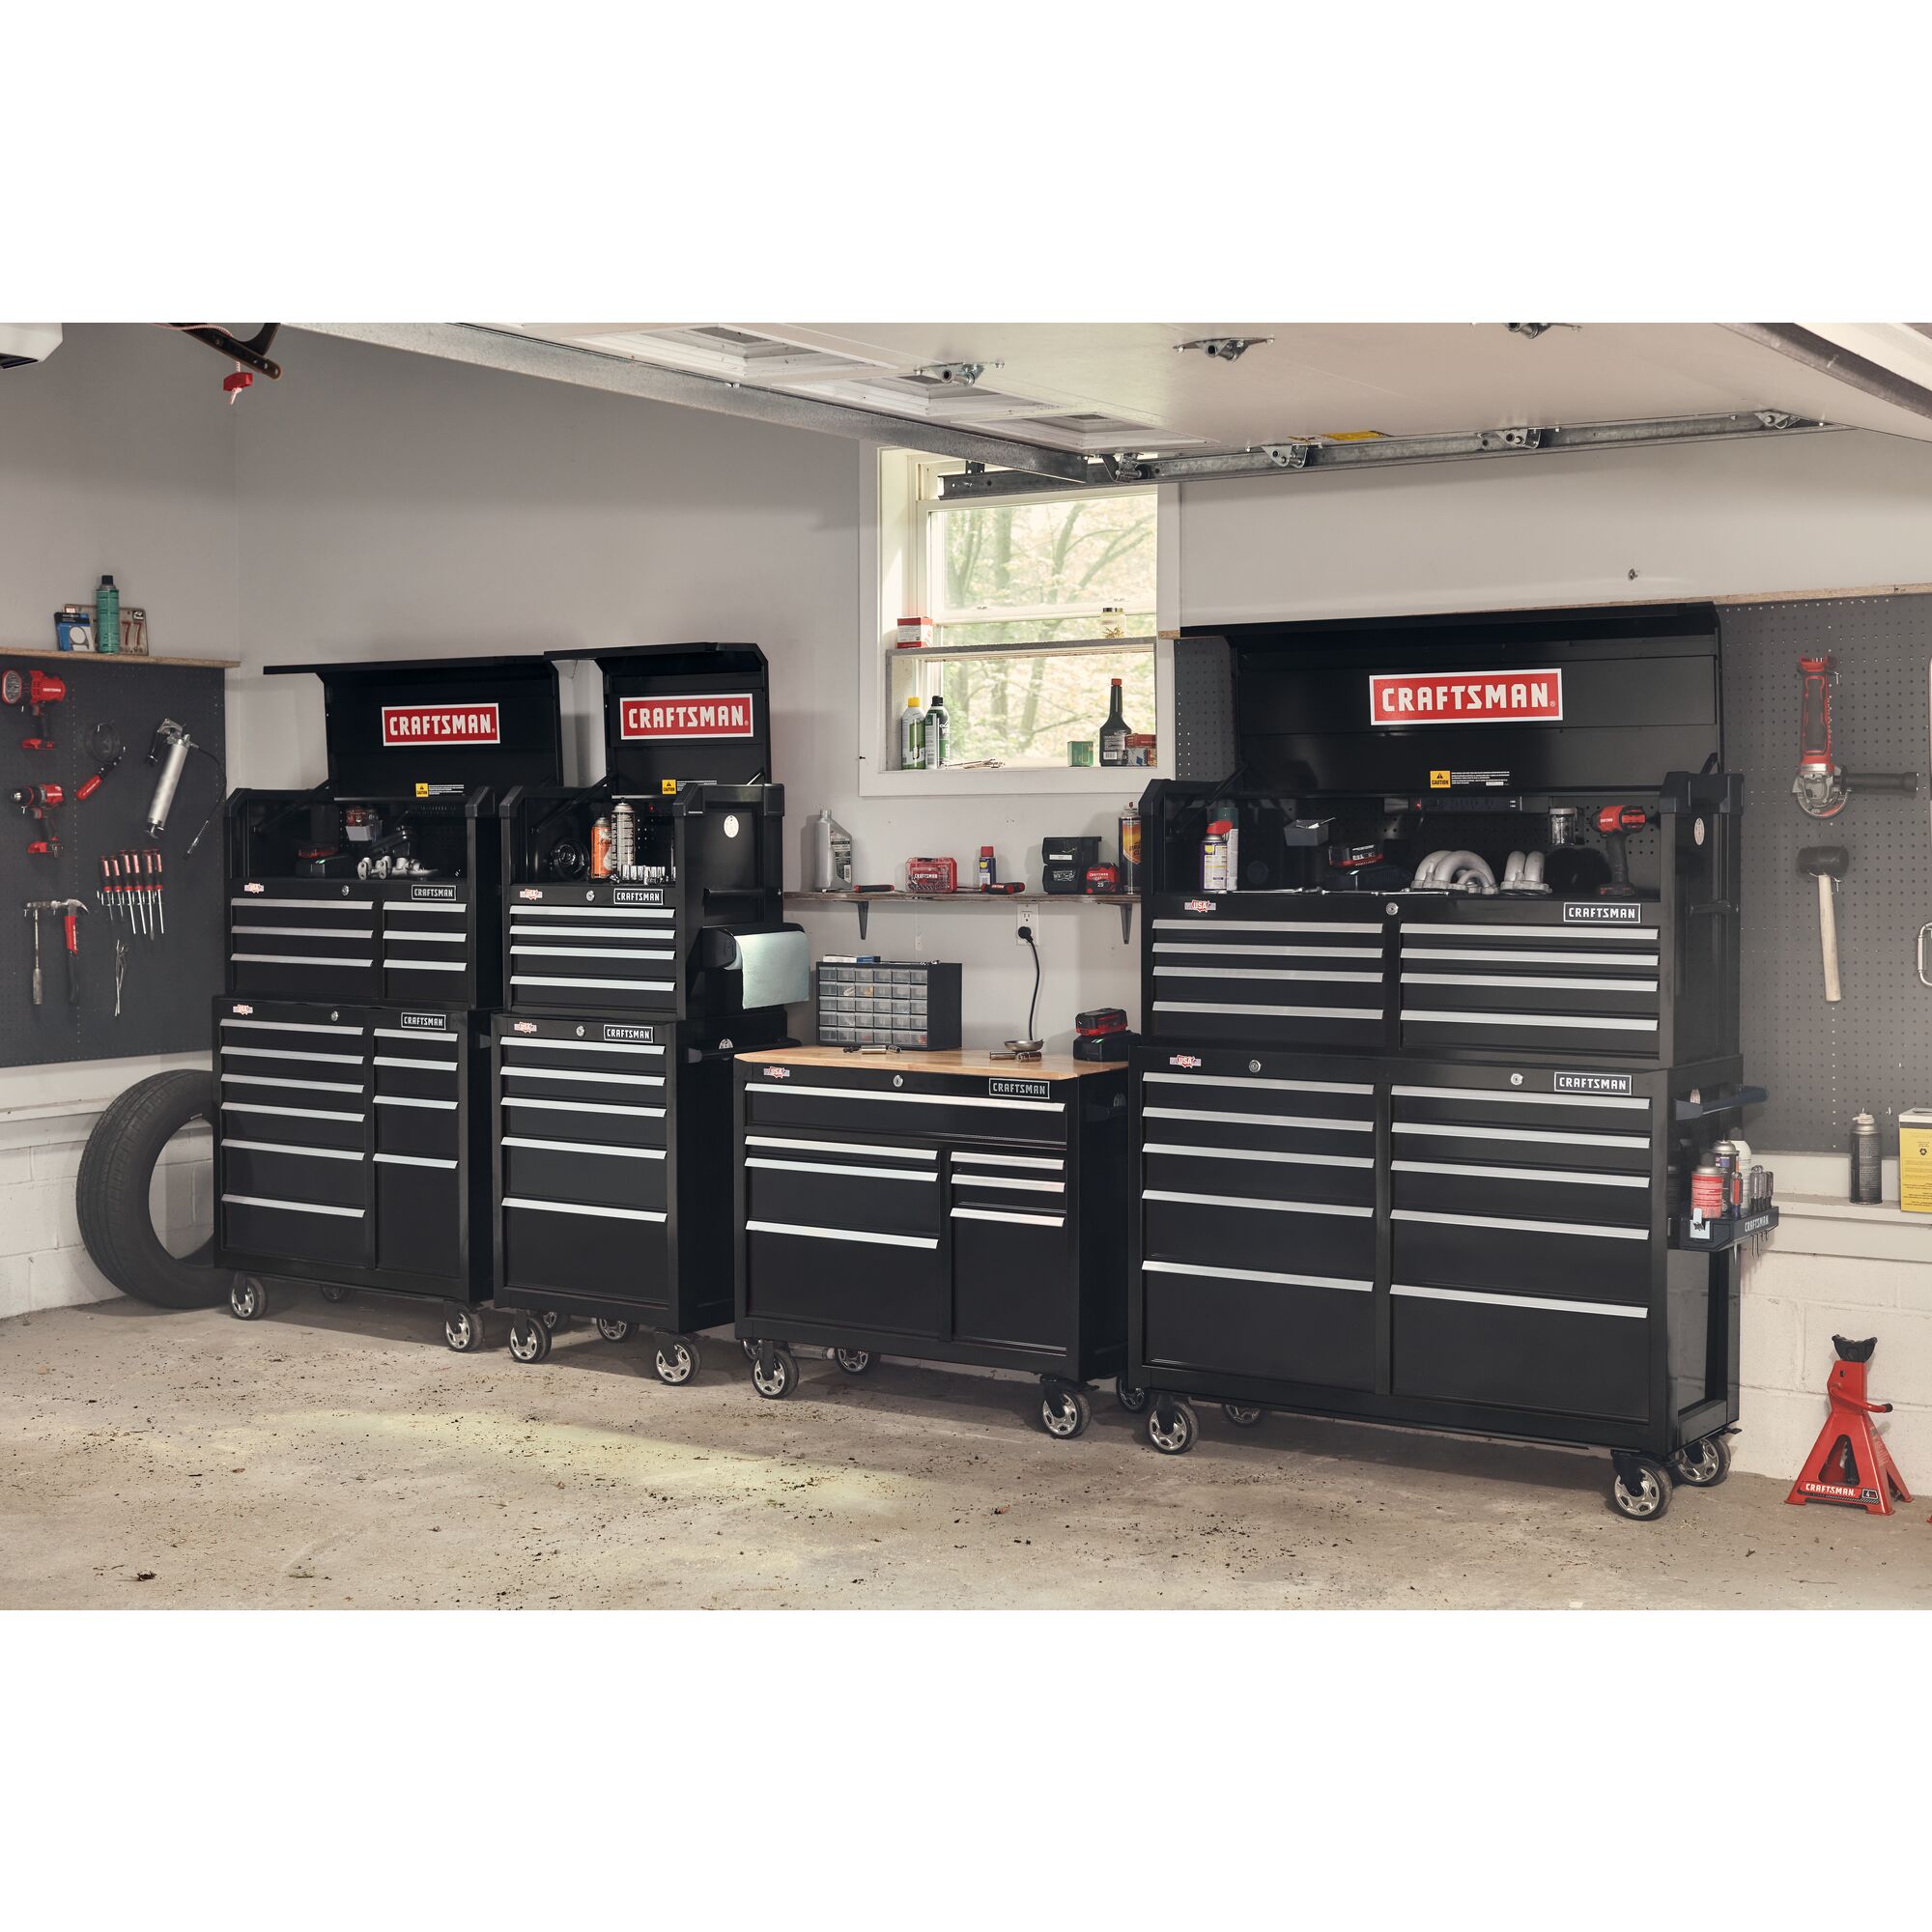 CRAFTSMAN 2000 Series 26-in W x 24.7-in H 4-Drawer Steel Tool Chest (Black)  in the Top Tool Chests department at